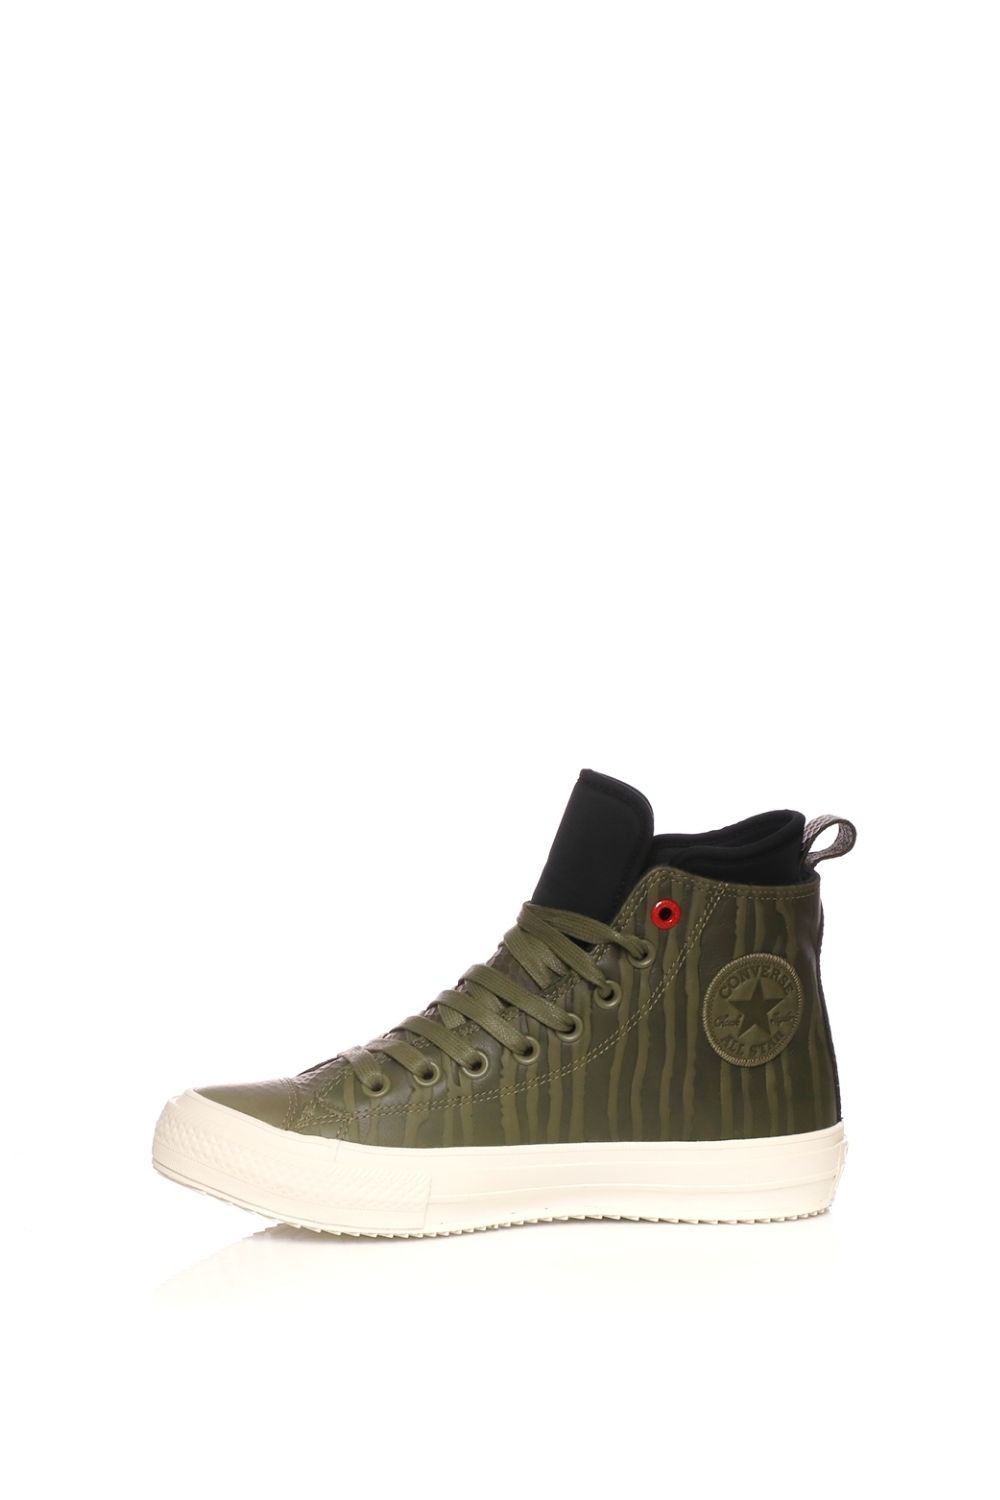 CONVERSE - Ανδρικά ψηλά sneakers CONVERSE Chuck Taylor AS WP Boot Hi χακί Ανδρικά/Παπούτσια/Sneakers